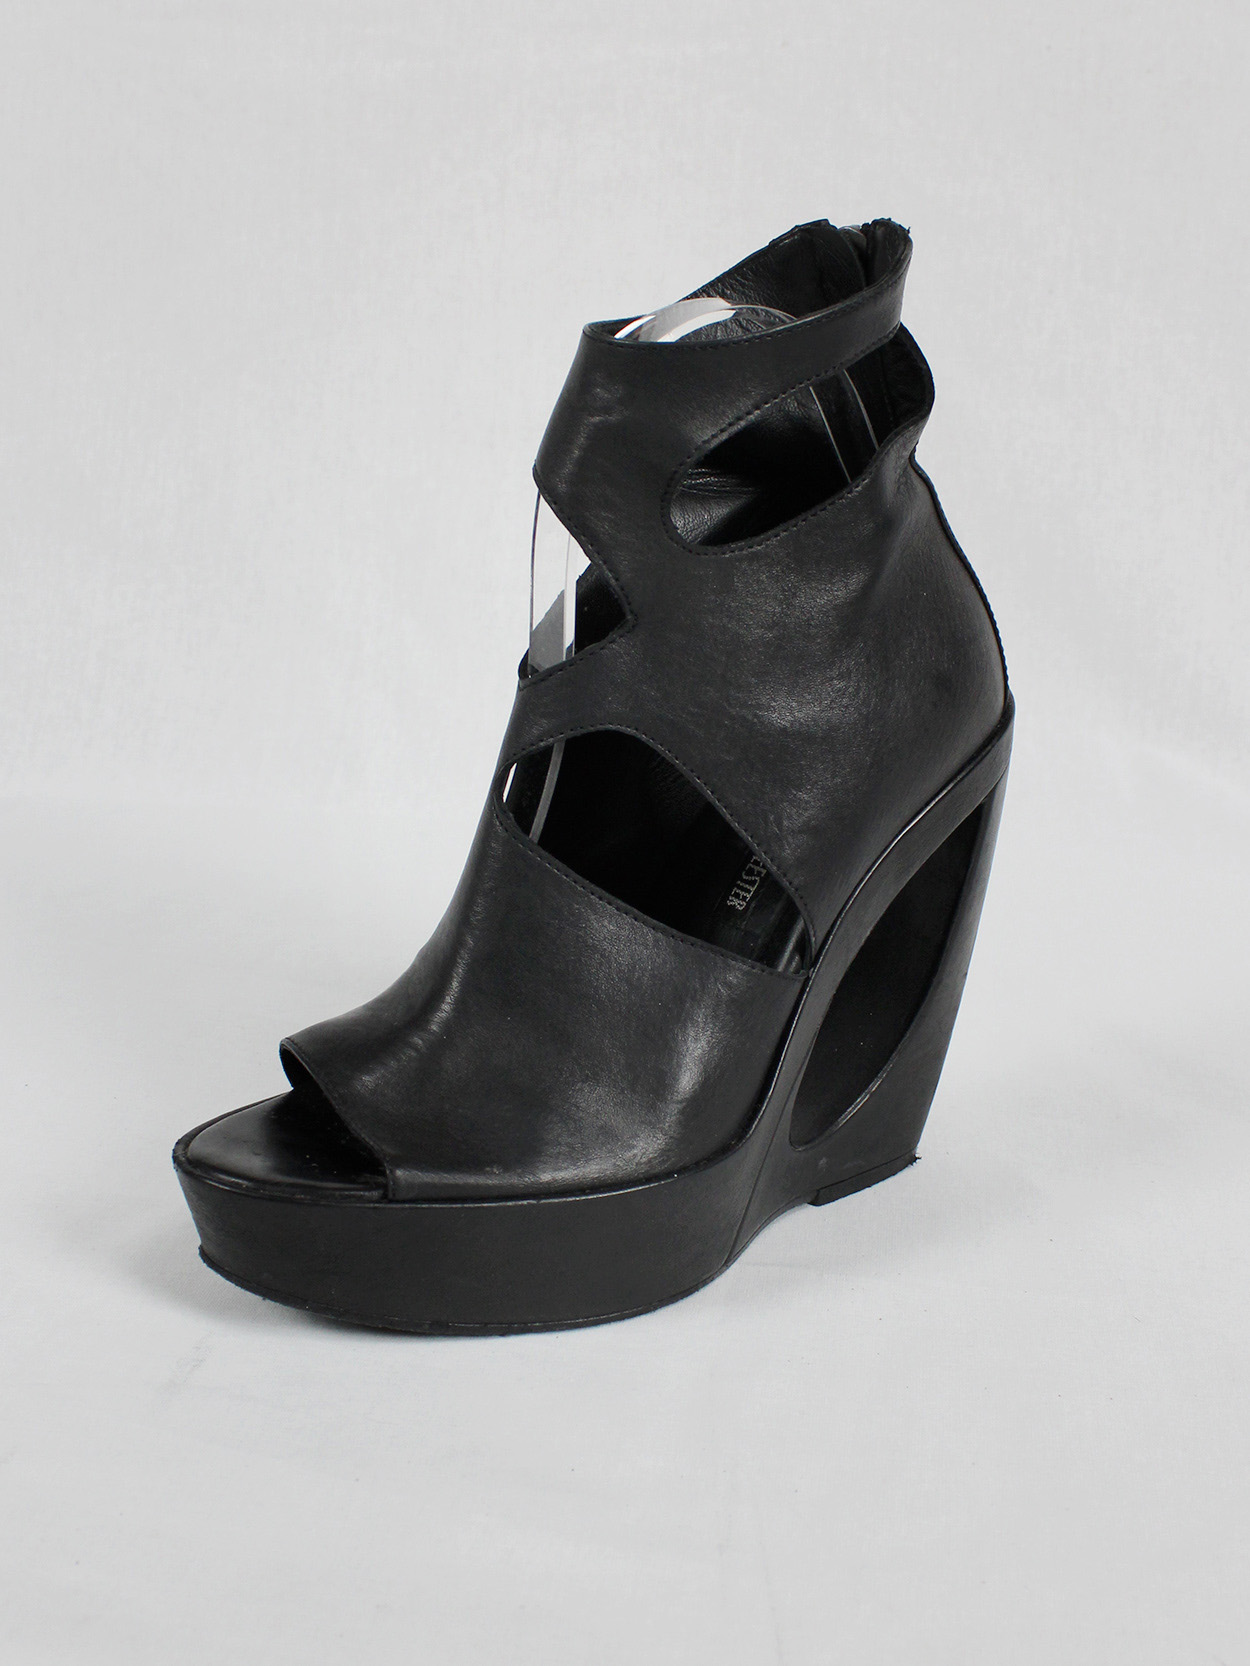 vaniitas Ann Demeulemeester black boots with cut-out curved heel fall 2013 (20)